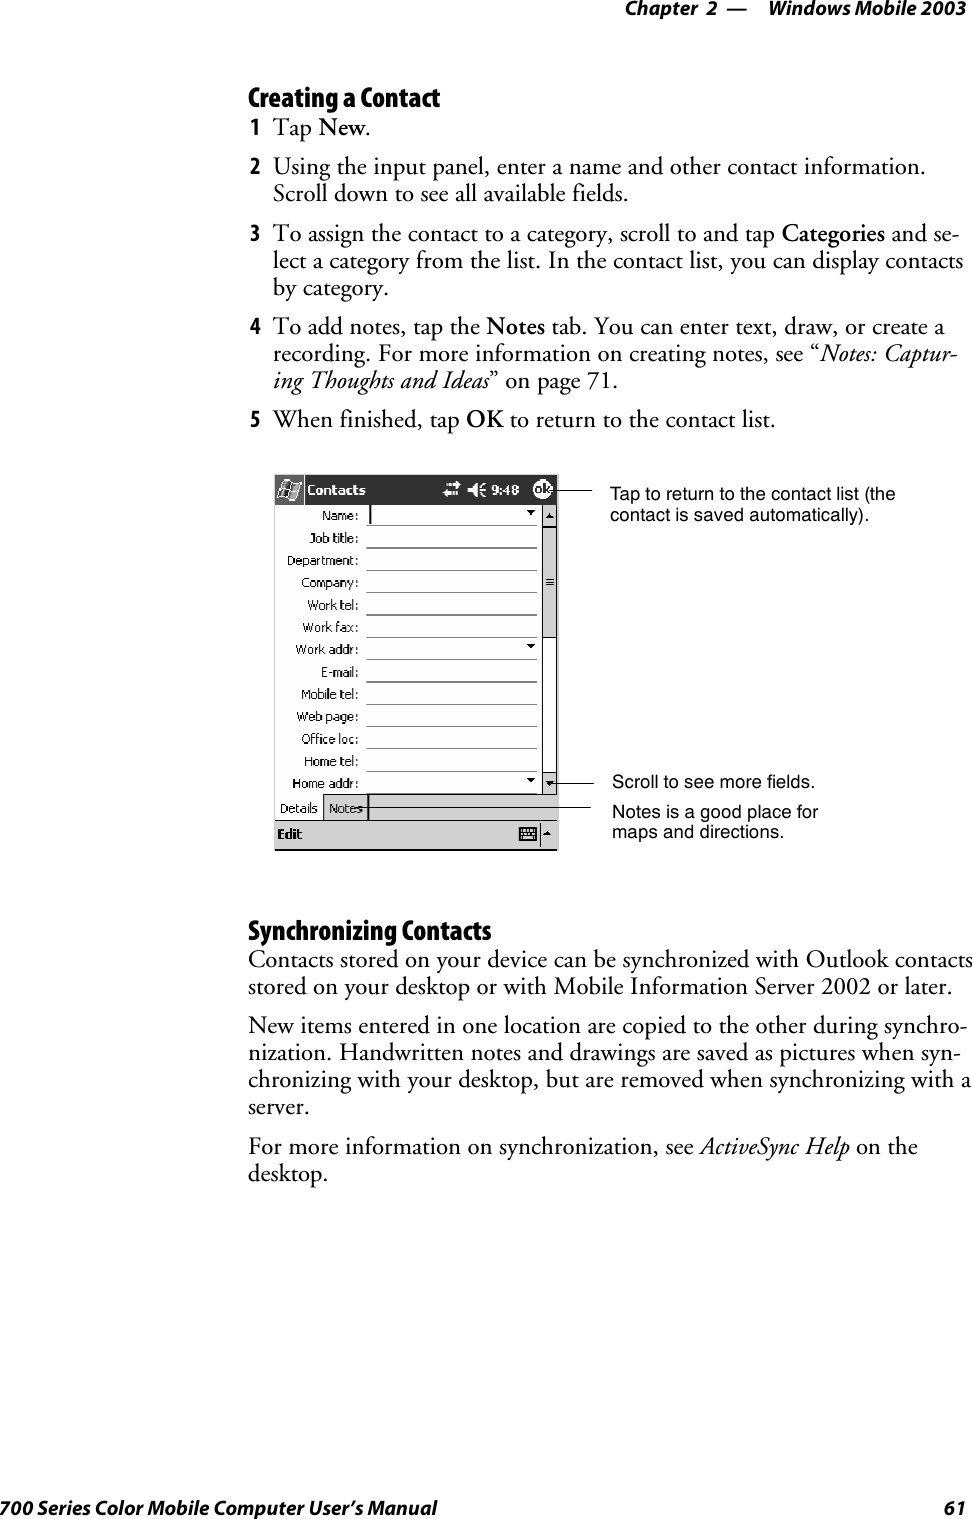 Windows Mobile 2003—Chapter 261700 Series Color Mobile Computer User’s ManualCreating a Contact1Tap New.2Using the input panel, enter a name and other contact information.Scroll down to see all available fields.3To assign the contact to a category, scroll to and tap Categories and se-lect a category from the list. In the contact list, you can display contactsby category.4To add notes, tap the Notes tab. You can enter text, draw, or create arecording. For more information on creating notes, see “Notes: Captur-ing Thoughts and Ideas”onpage71.5When finished, tap OK to return to the contact list.Tap to return to the contact list (thecontact is saved automatically).Scroll to see more fields.Notes is a good place formaps and directions.Synchronizing ContactsContacts stored on your device can be synchronized with Outlook contactsstored on your desktop or with Mobile Information Server 2002 or later.New items entered in one location are copied to the other during synchro-nization. Handwritten notes and drawings are saved as pictures when syn-chronizing with your desktop, but are removed when synchronizing with aserver.For more information on synchronization, see ActiveSync Help on thedesktop.